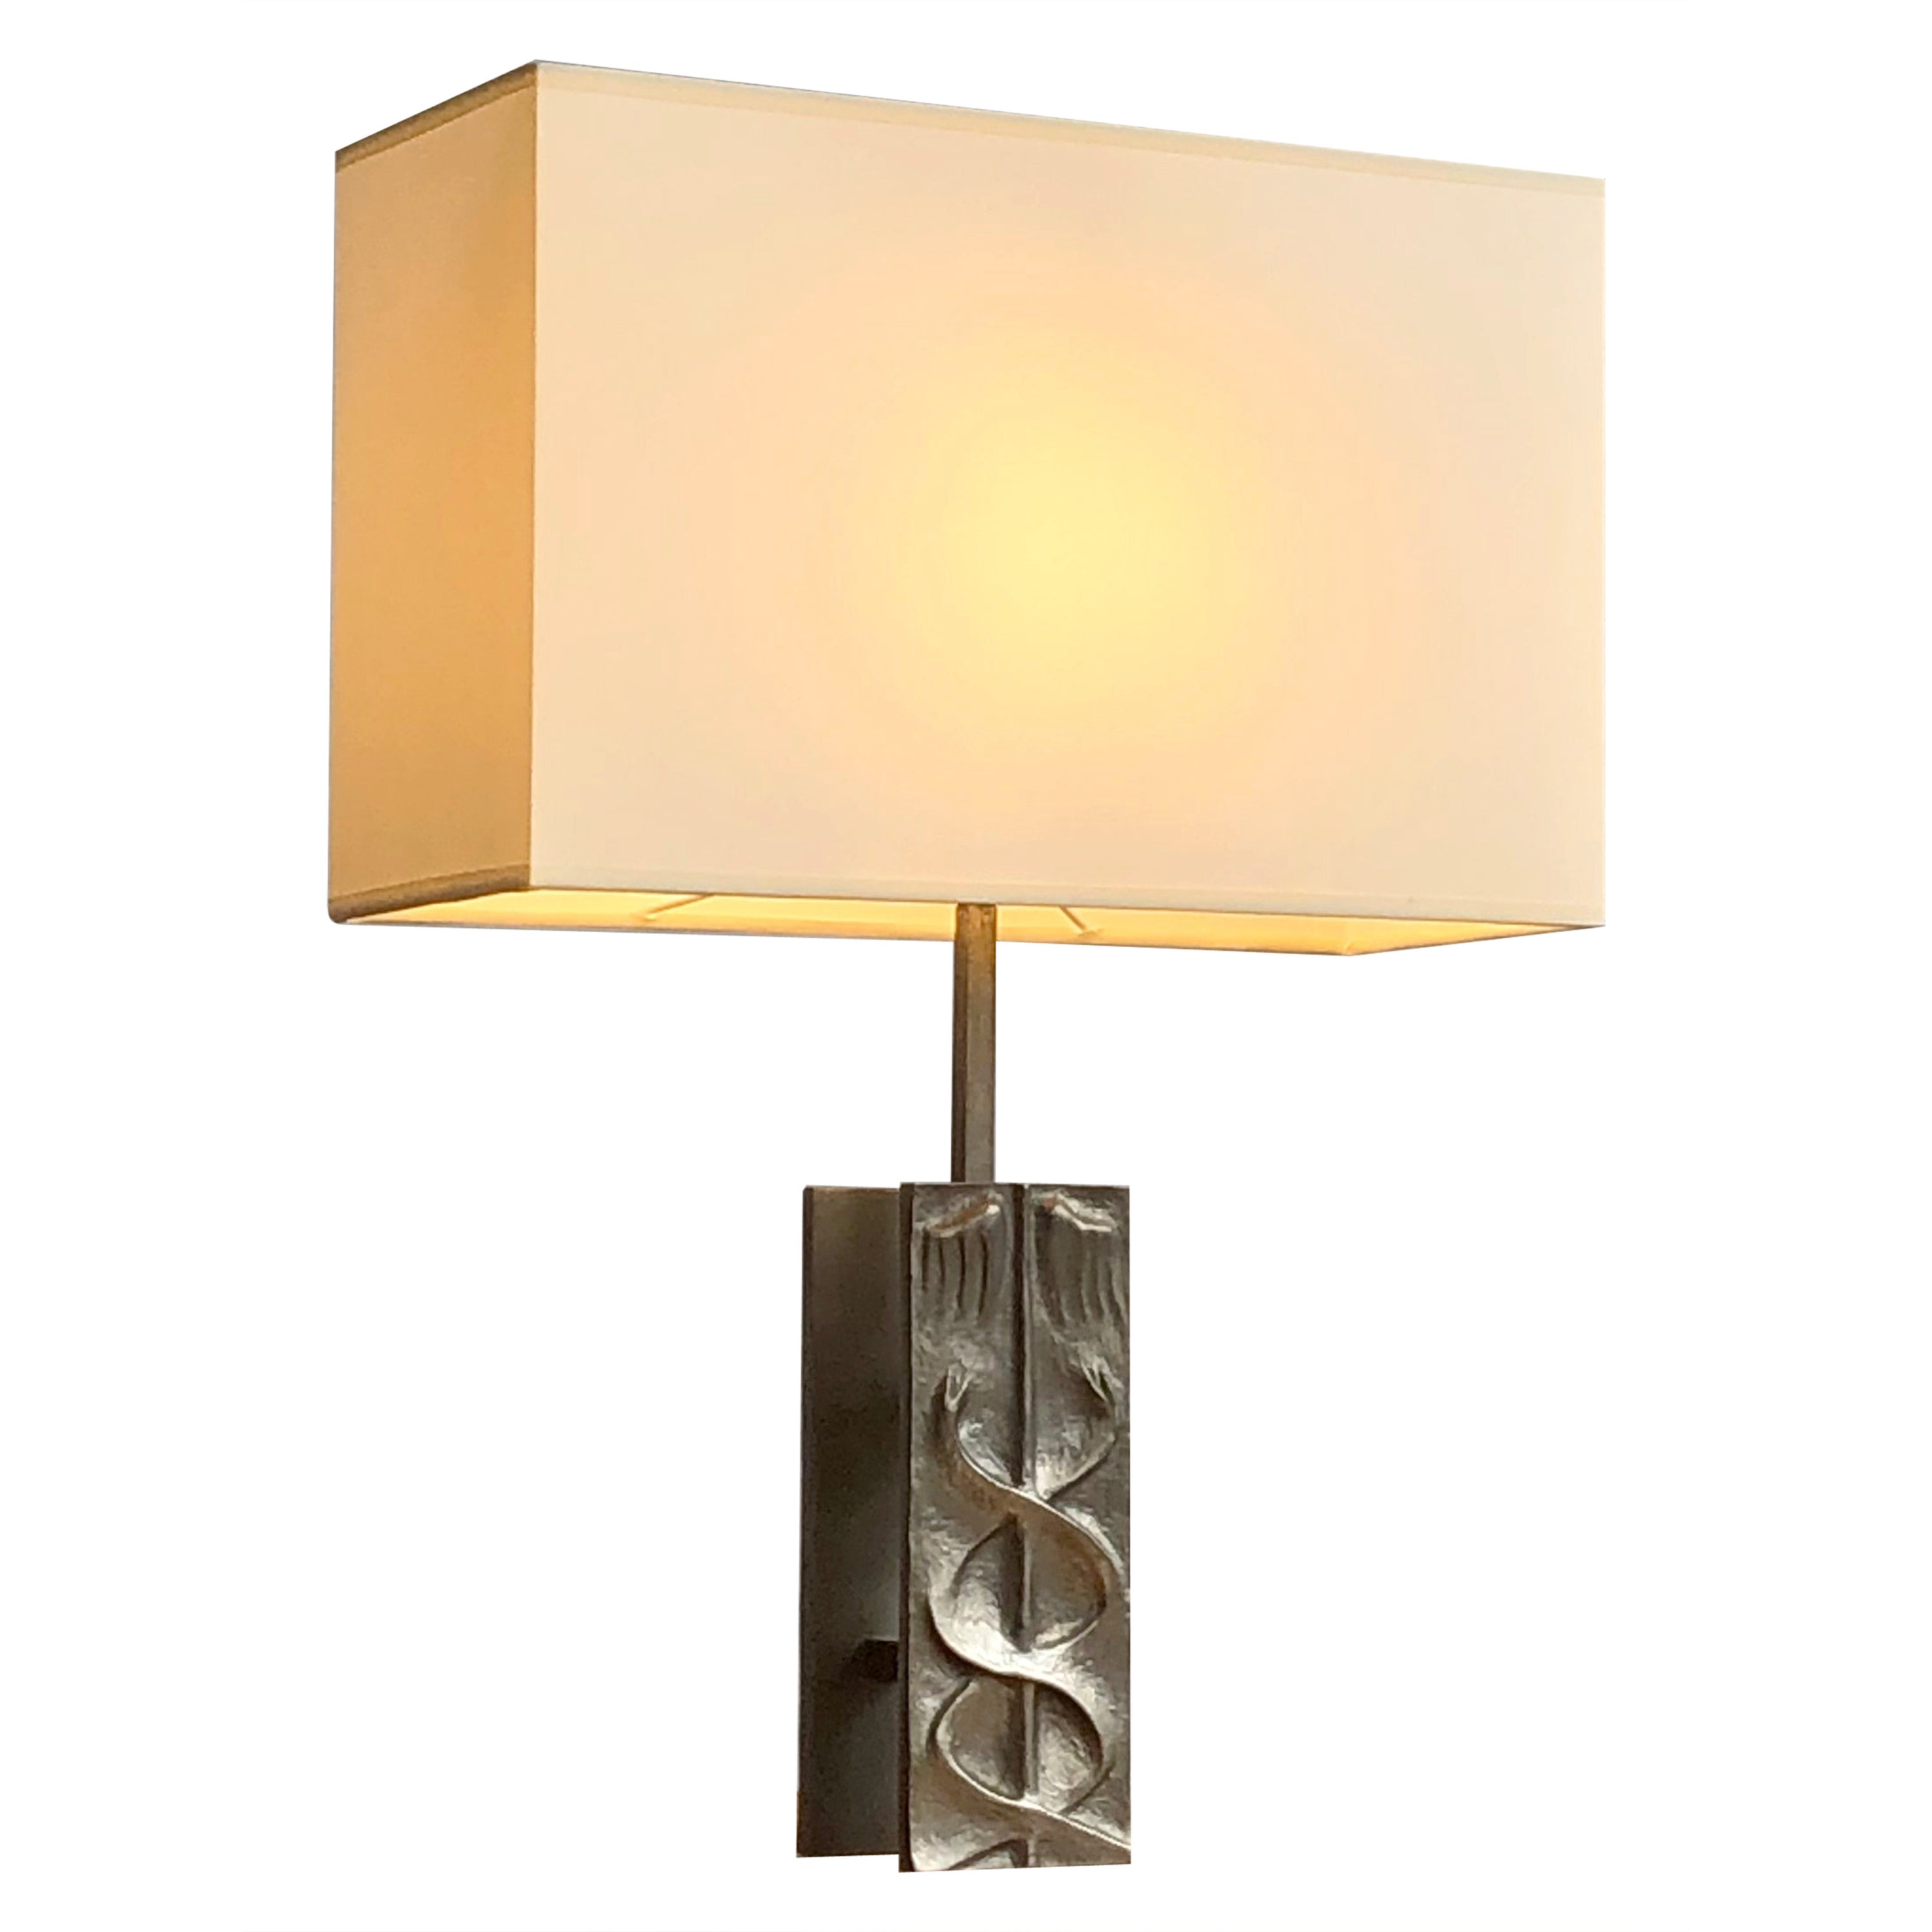 A SCULPTURAL NEO-CLASSICAL SHABBY-CHIC Bronze TABLE LAMP by FONDICA, France 1990 For Sale